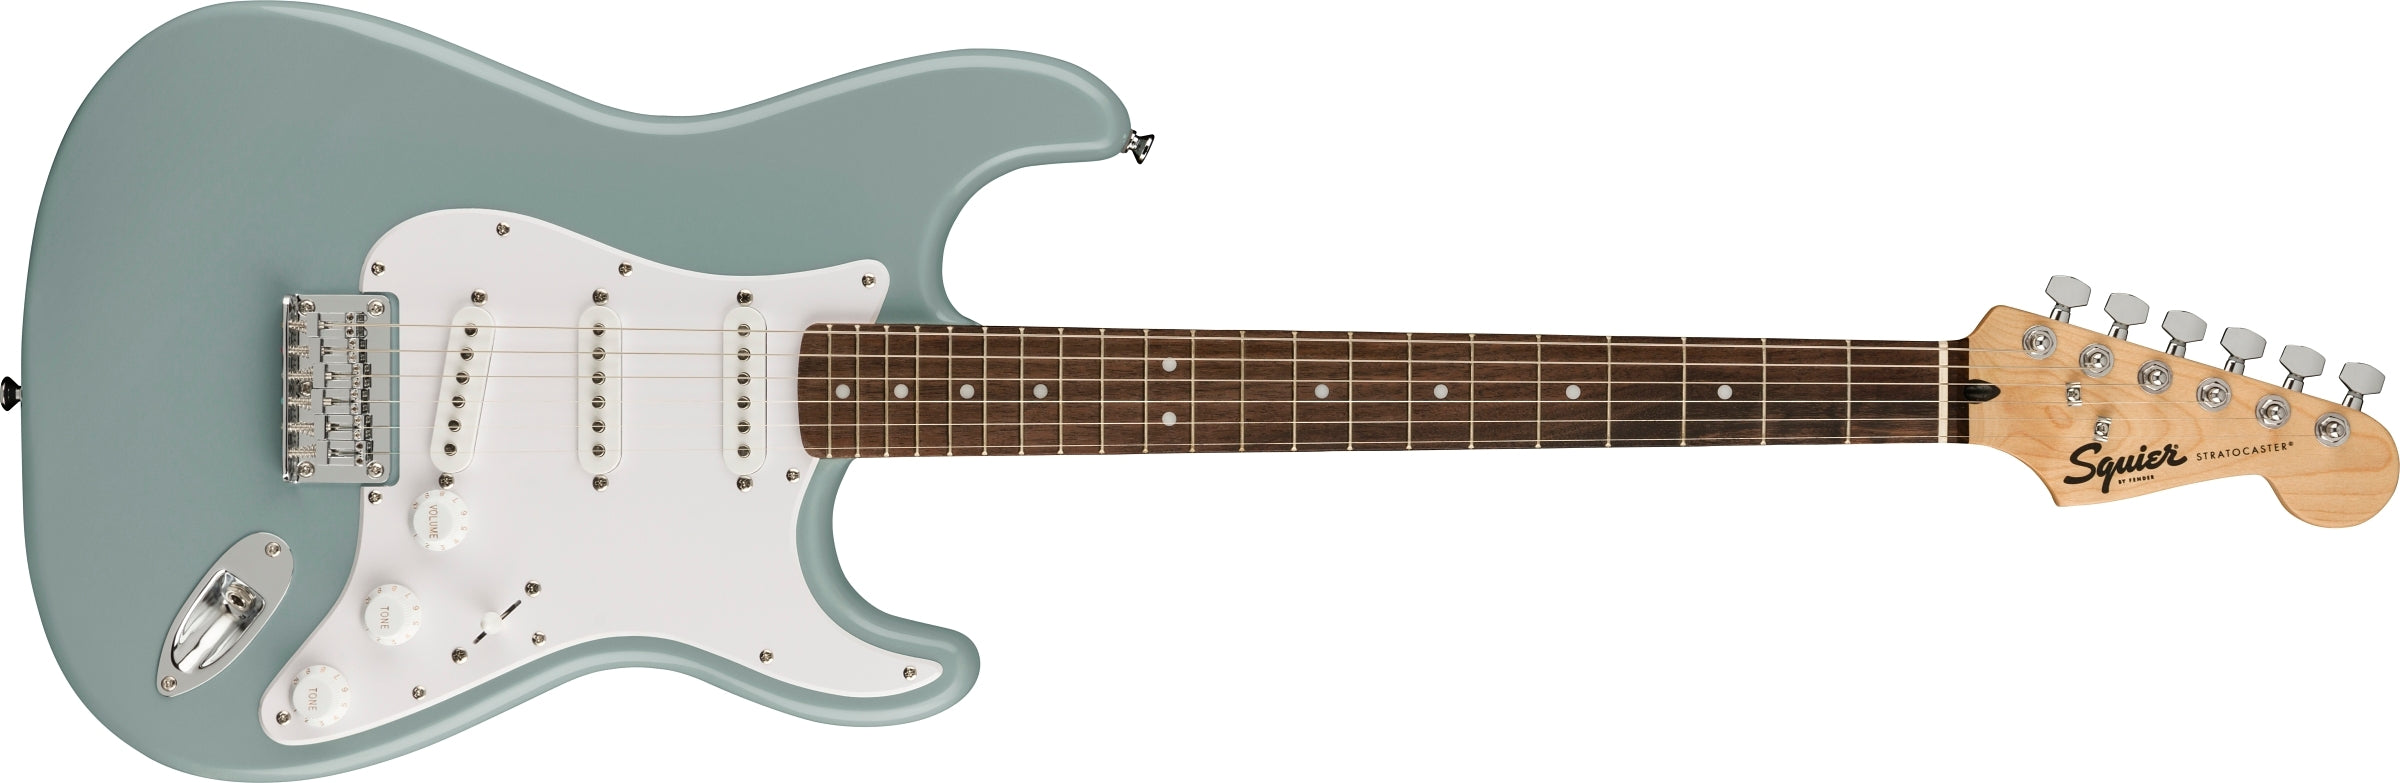 Squier by Fender Bullet Stratocaster Hard Tail Electric Guitar - LRL -